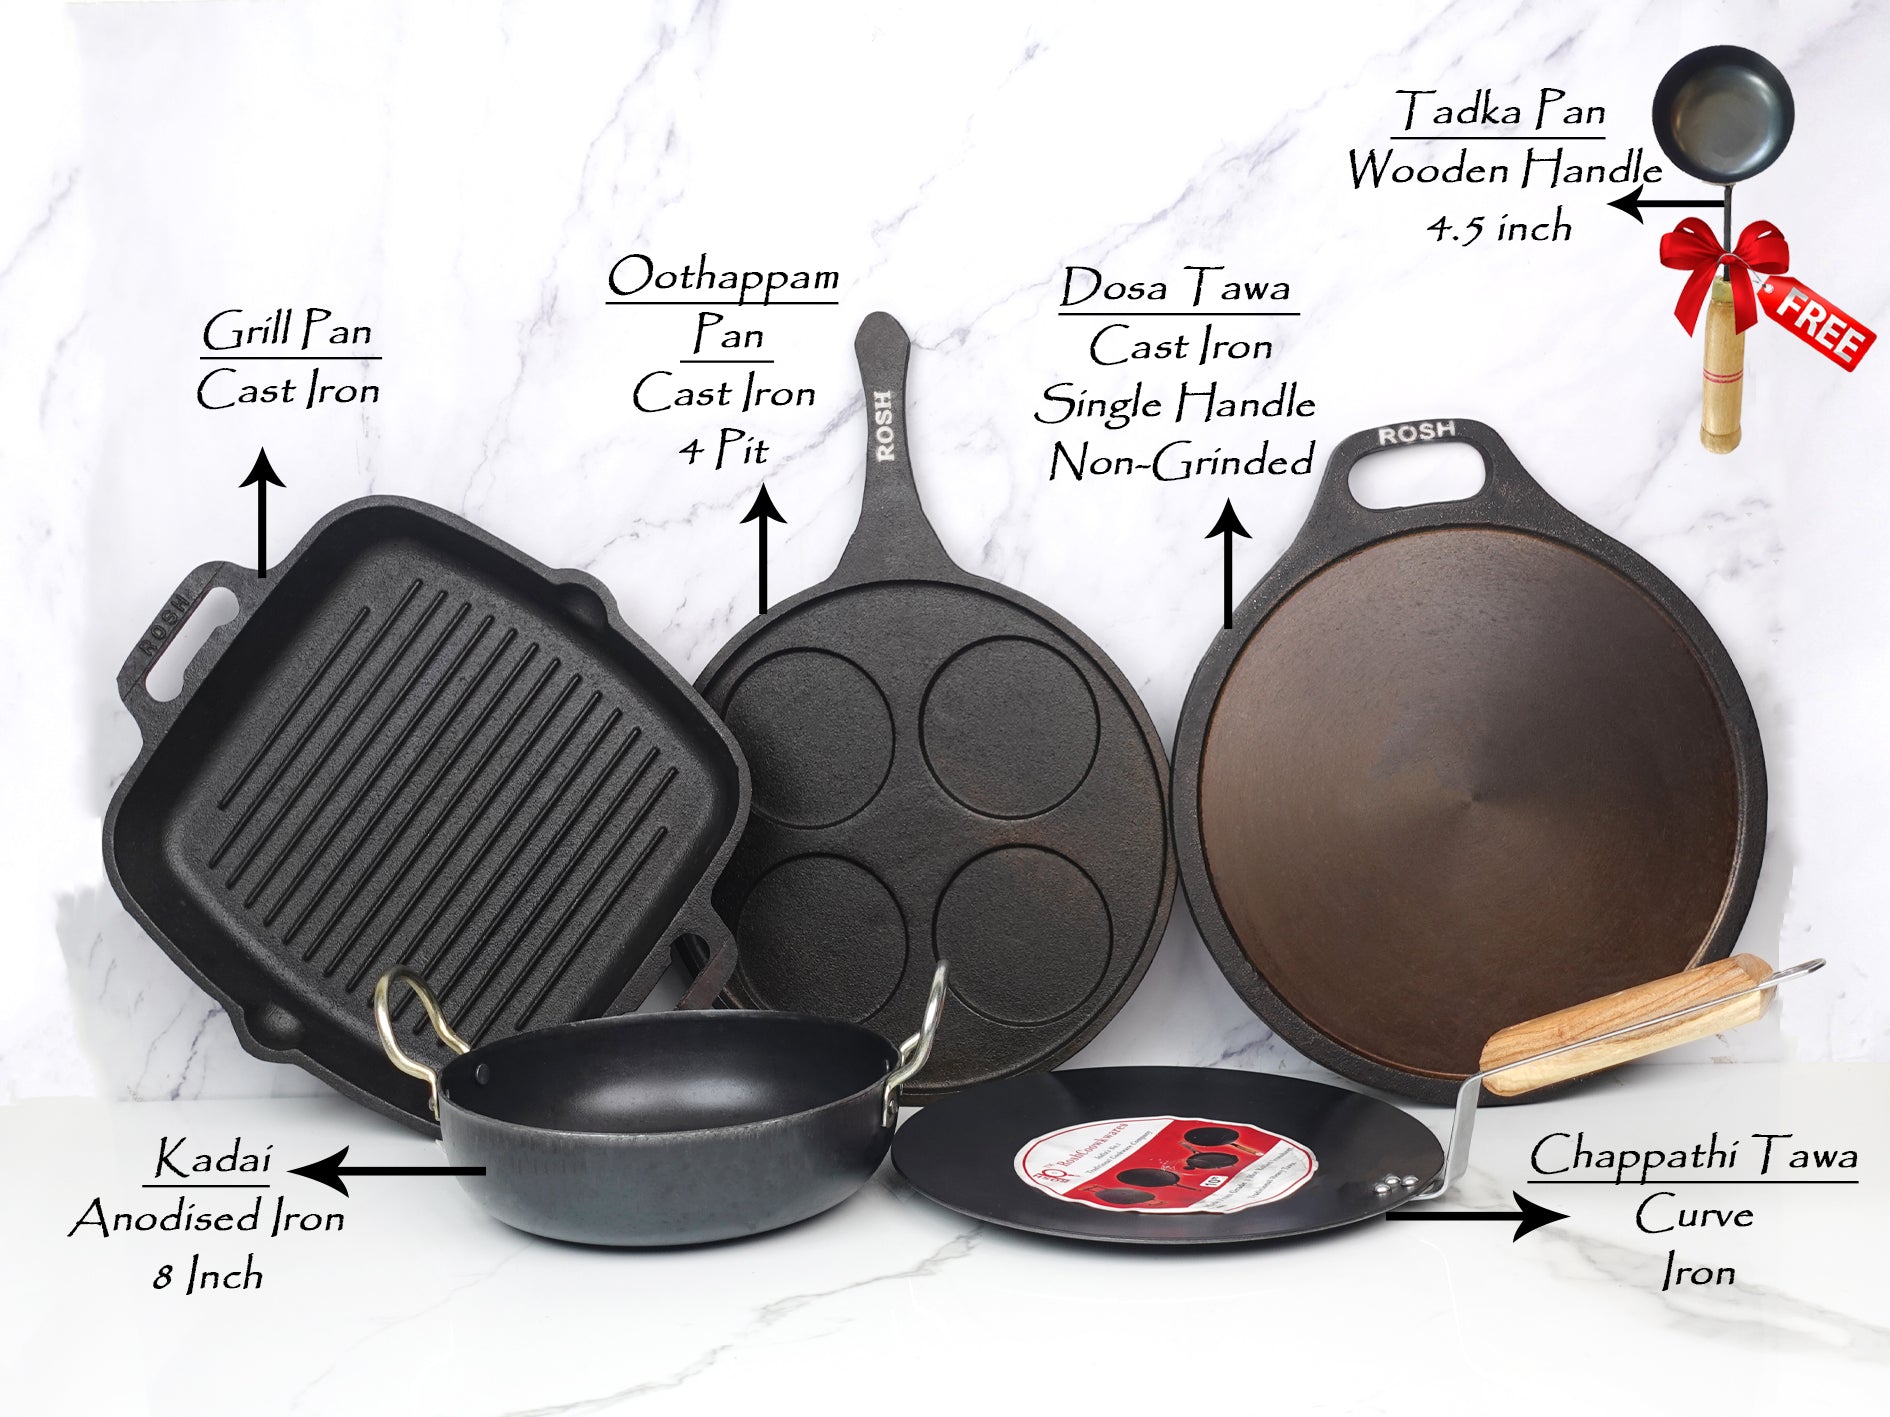 Combo Offer - 18 - Dosa Tawa - Cast Iron - Single Handle - Grinded